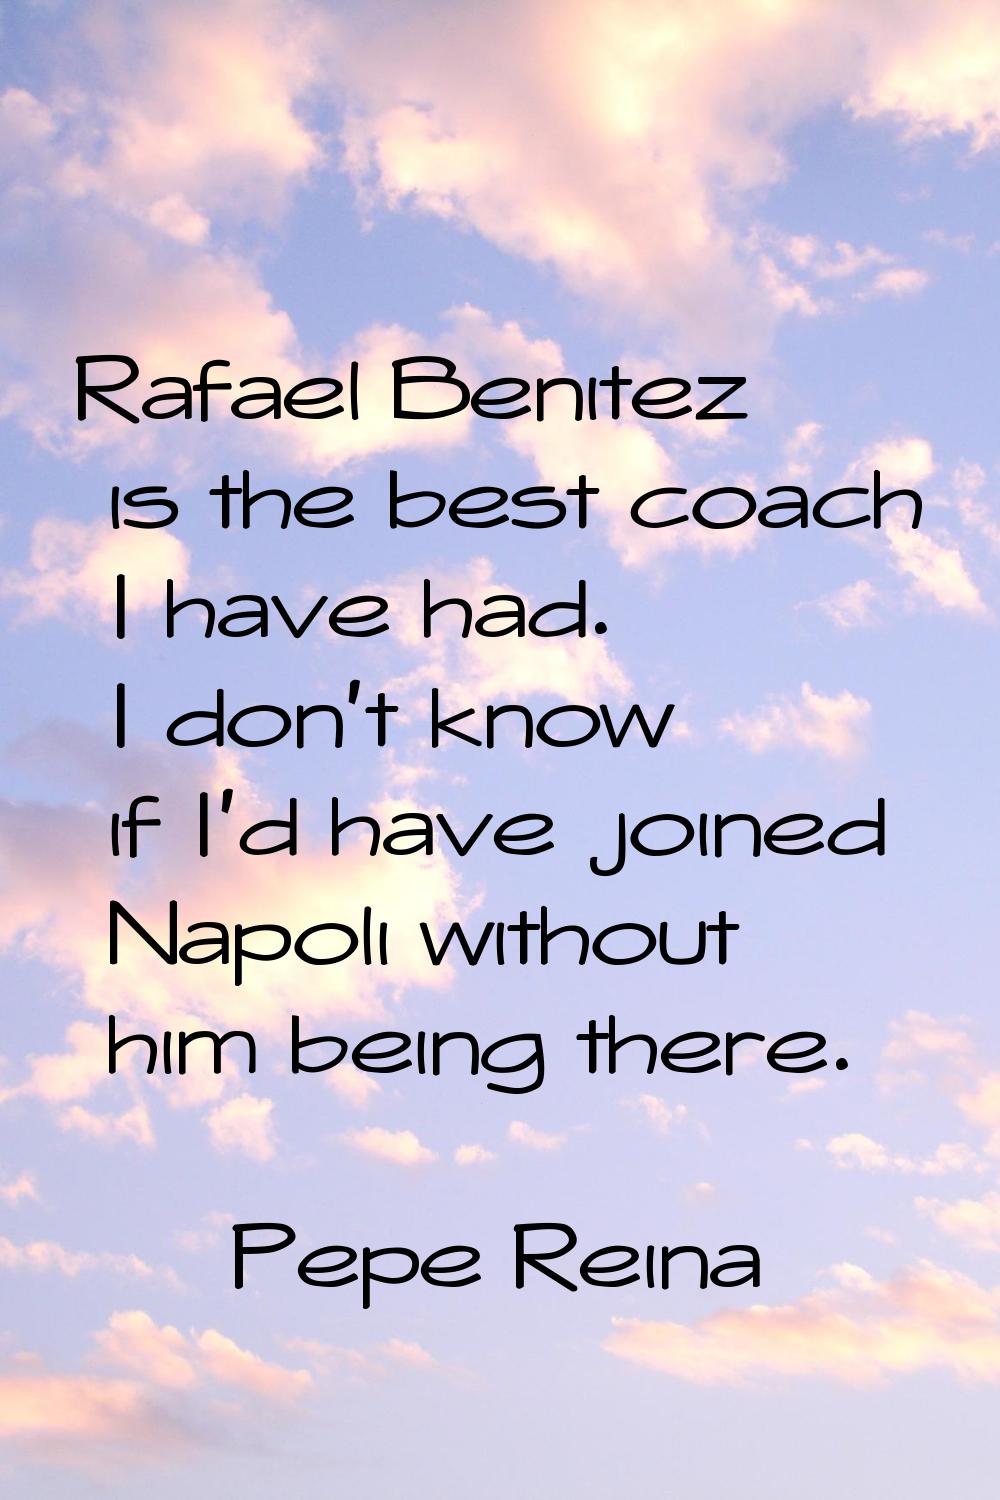 Rafael Benitez is the best coach I have had. I don't know if I'd have joined Napoli without him bei